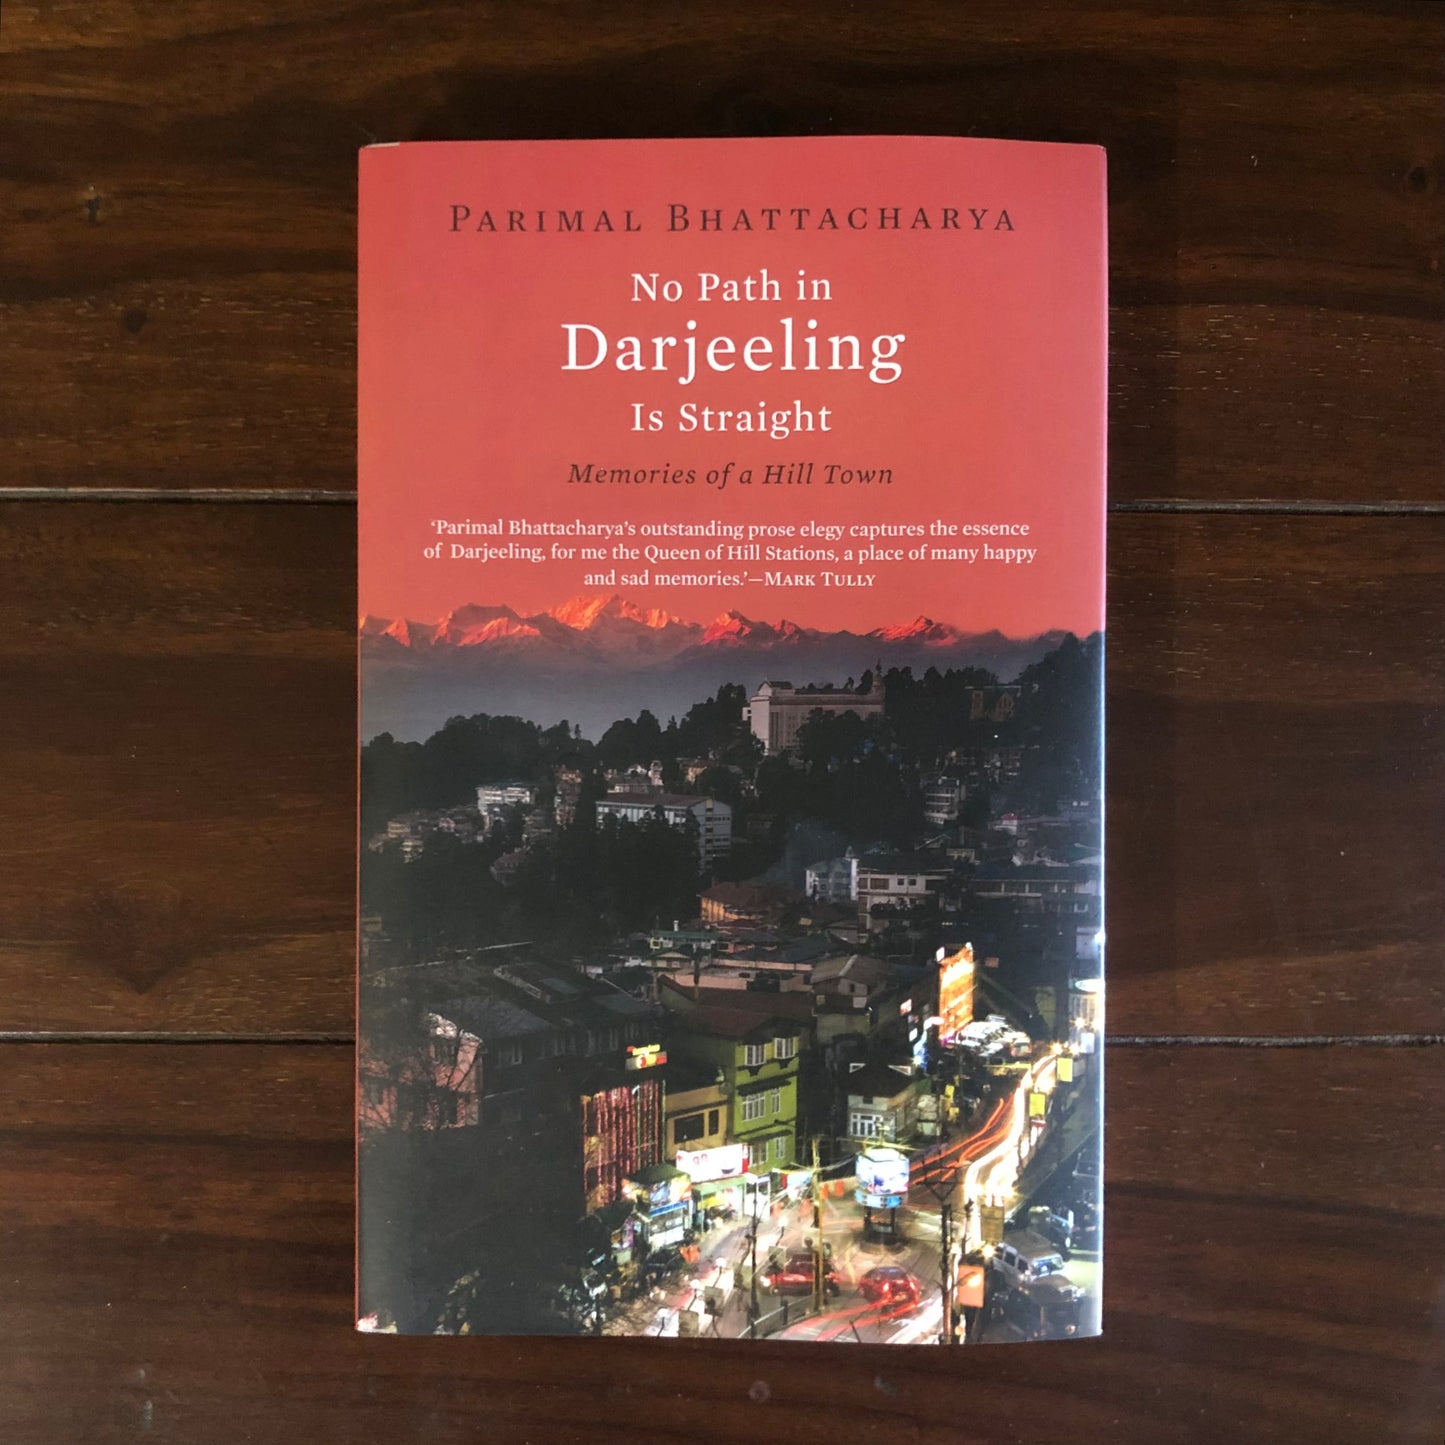 No Path in Darjeeling is Straight: Memories of a Hill Town - Parimal Bhattacharya